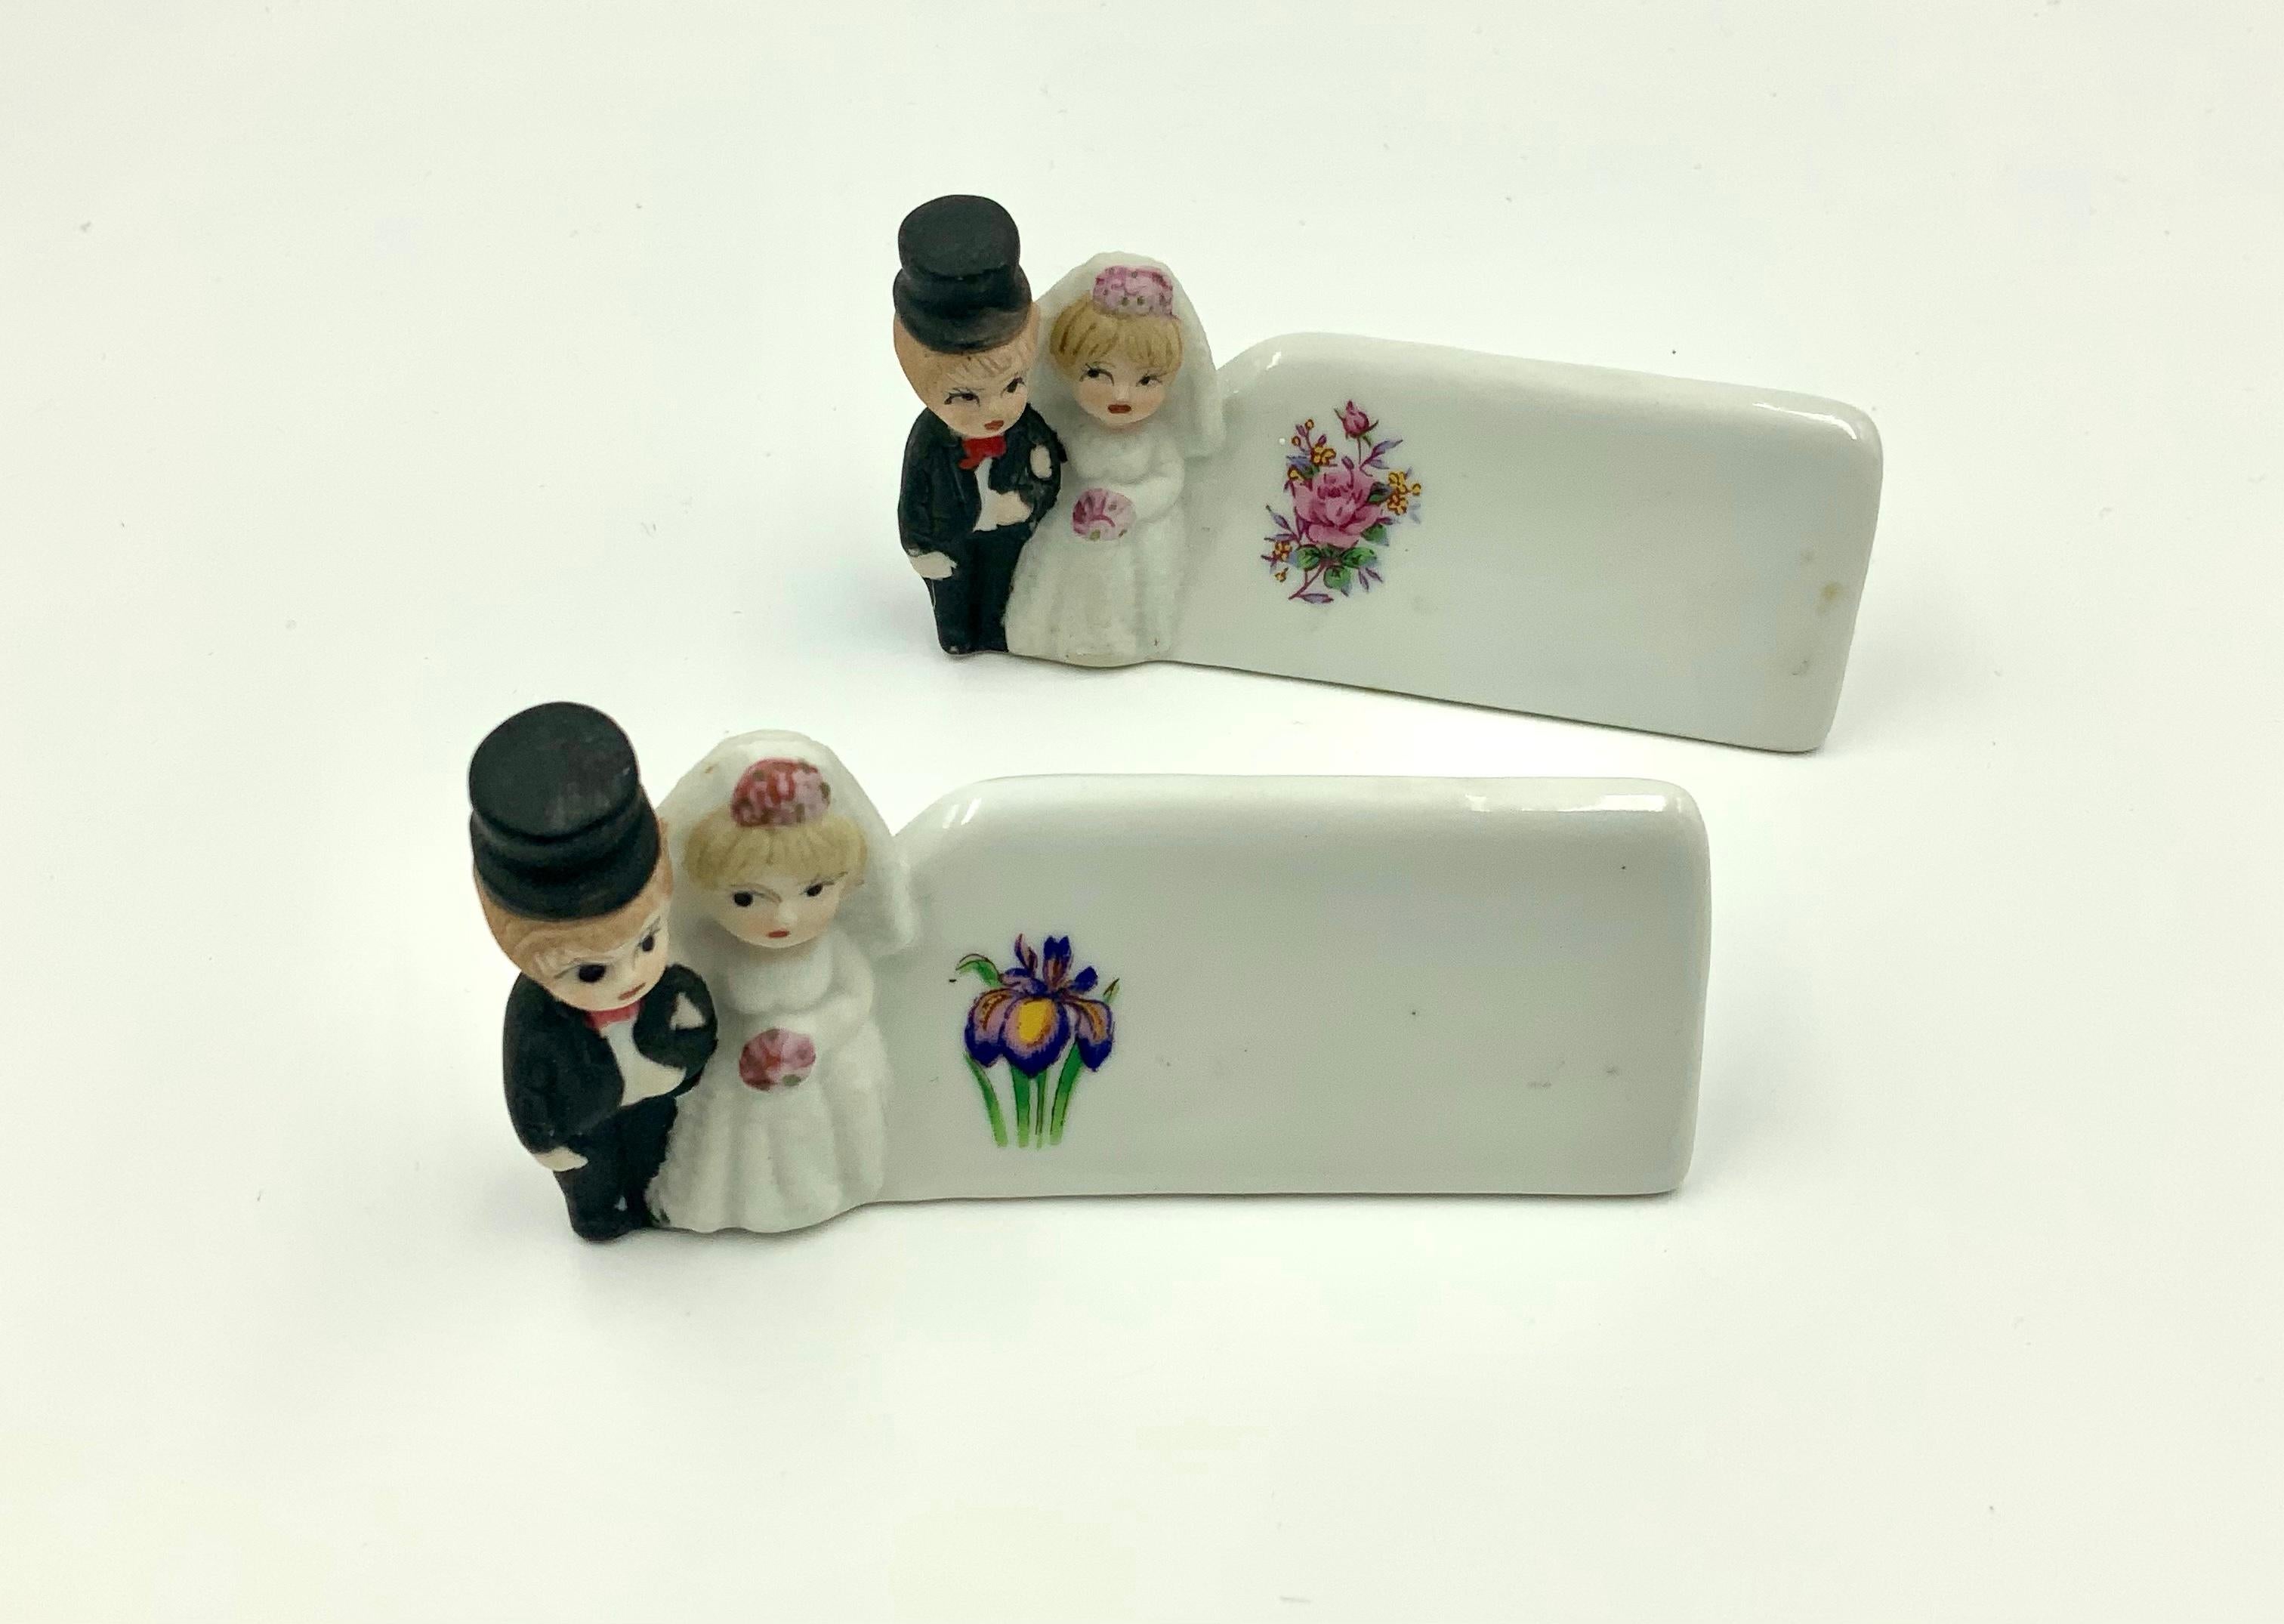 Hard to find adorable hand-painted bride and groom place card holders with flower decals. I have 3 sets of 2 available. Each pair has a different flower on the name area. This set has a crack on the bottom so it is listed separately at a lower price.